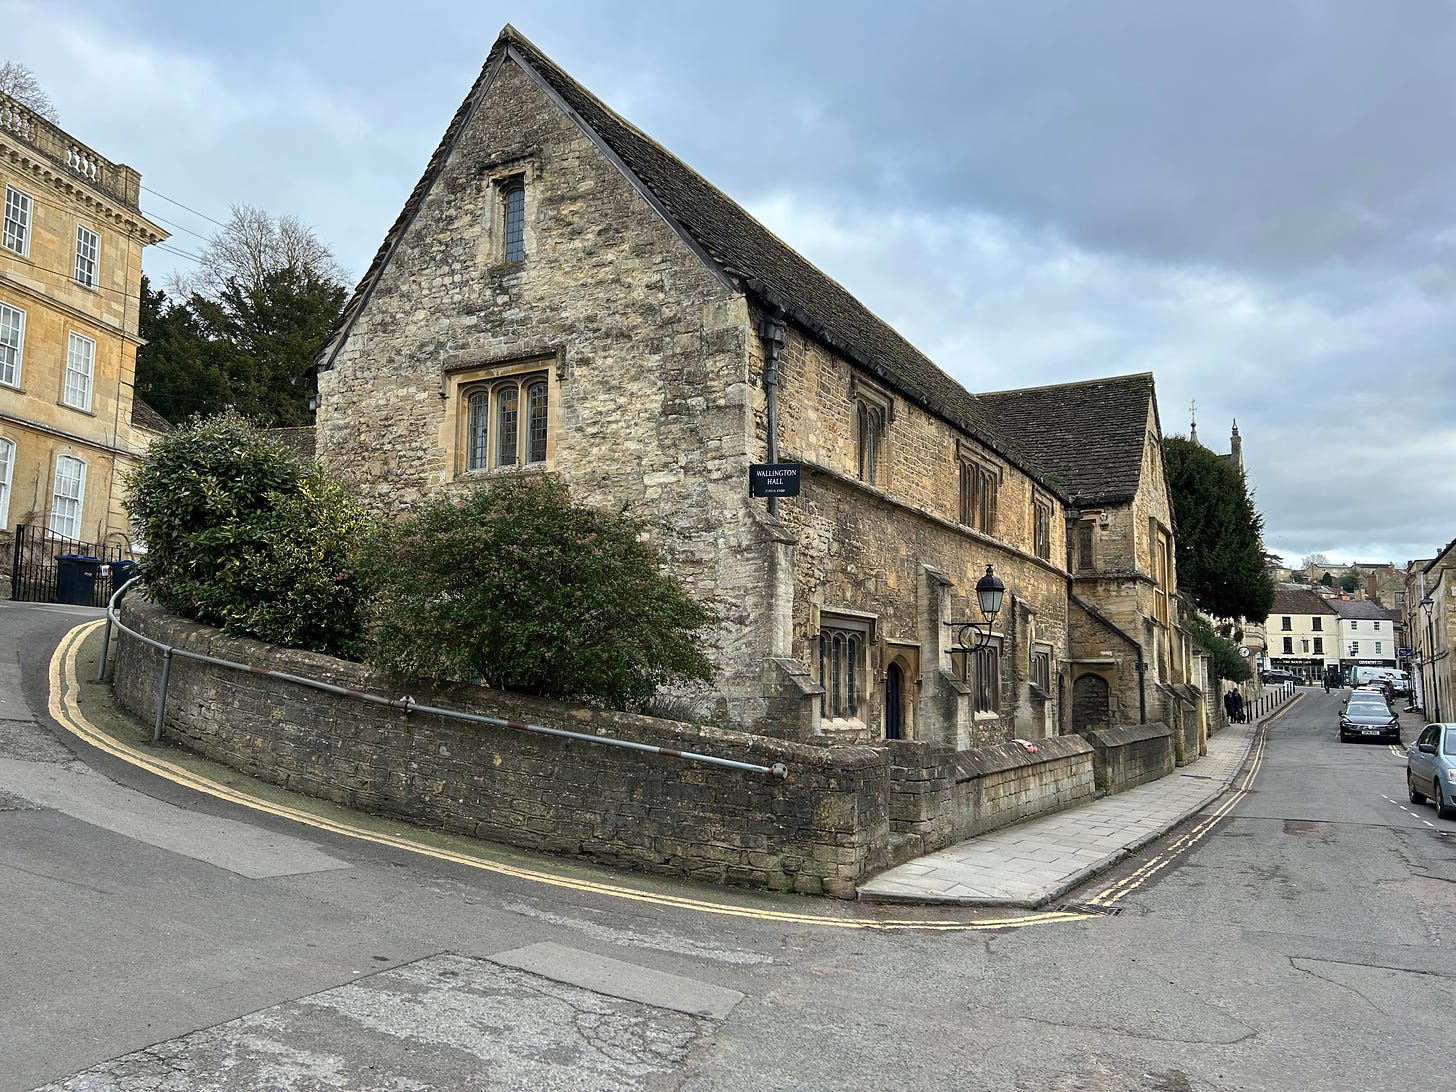 Holy Trinity Church Hall, Church Street, Bradford on Avon, Wiltshire. It is now used by the Freemasons. Image: Roland's Travels